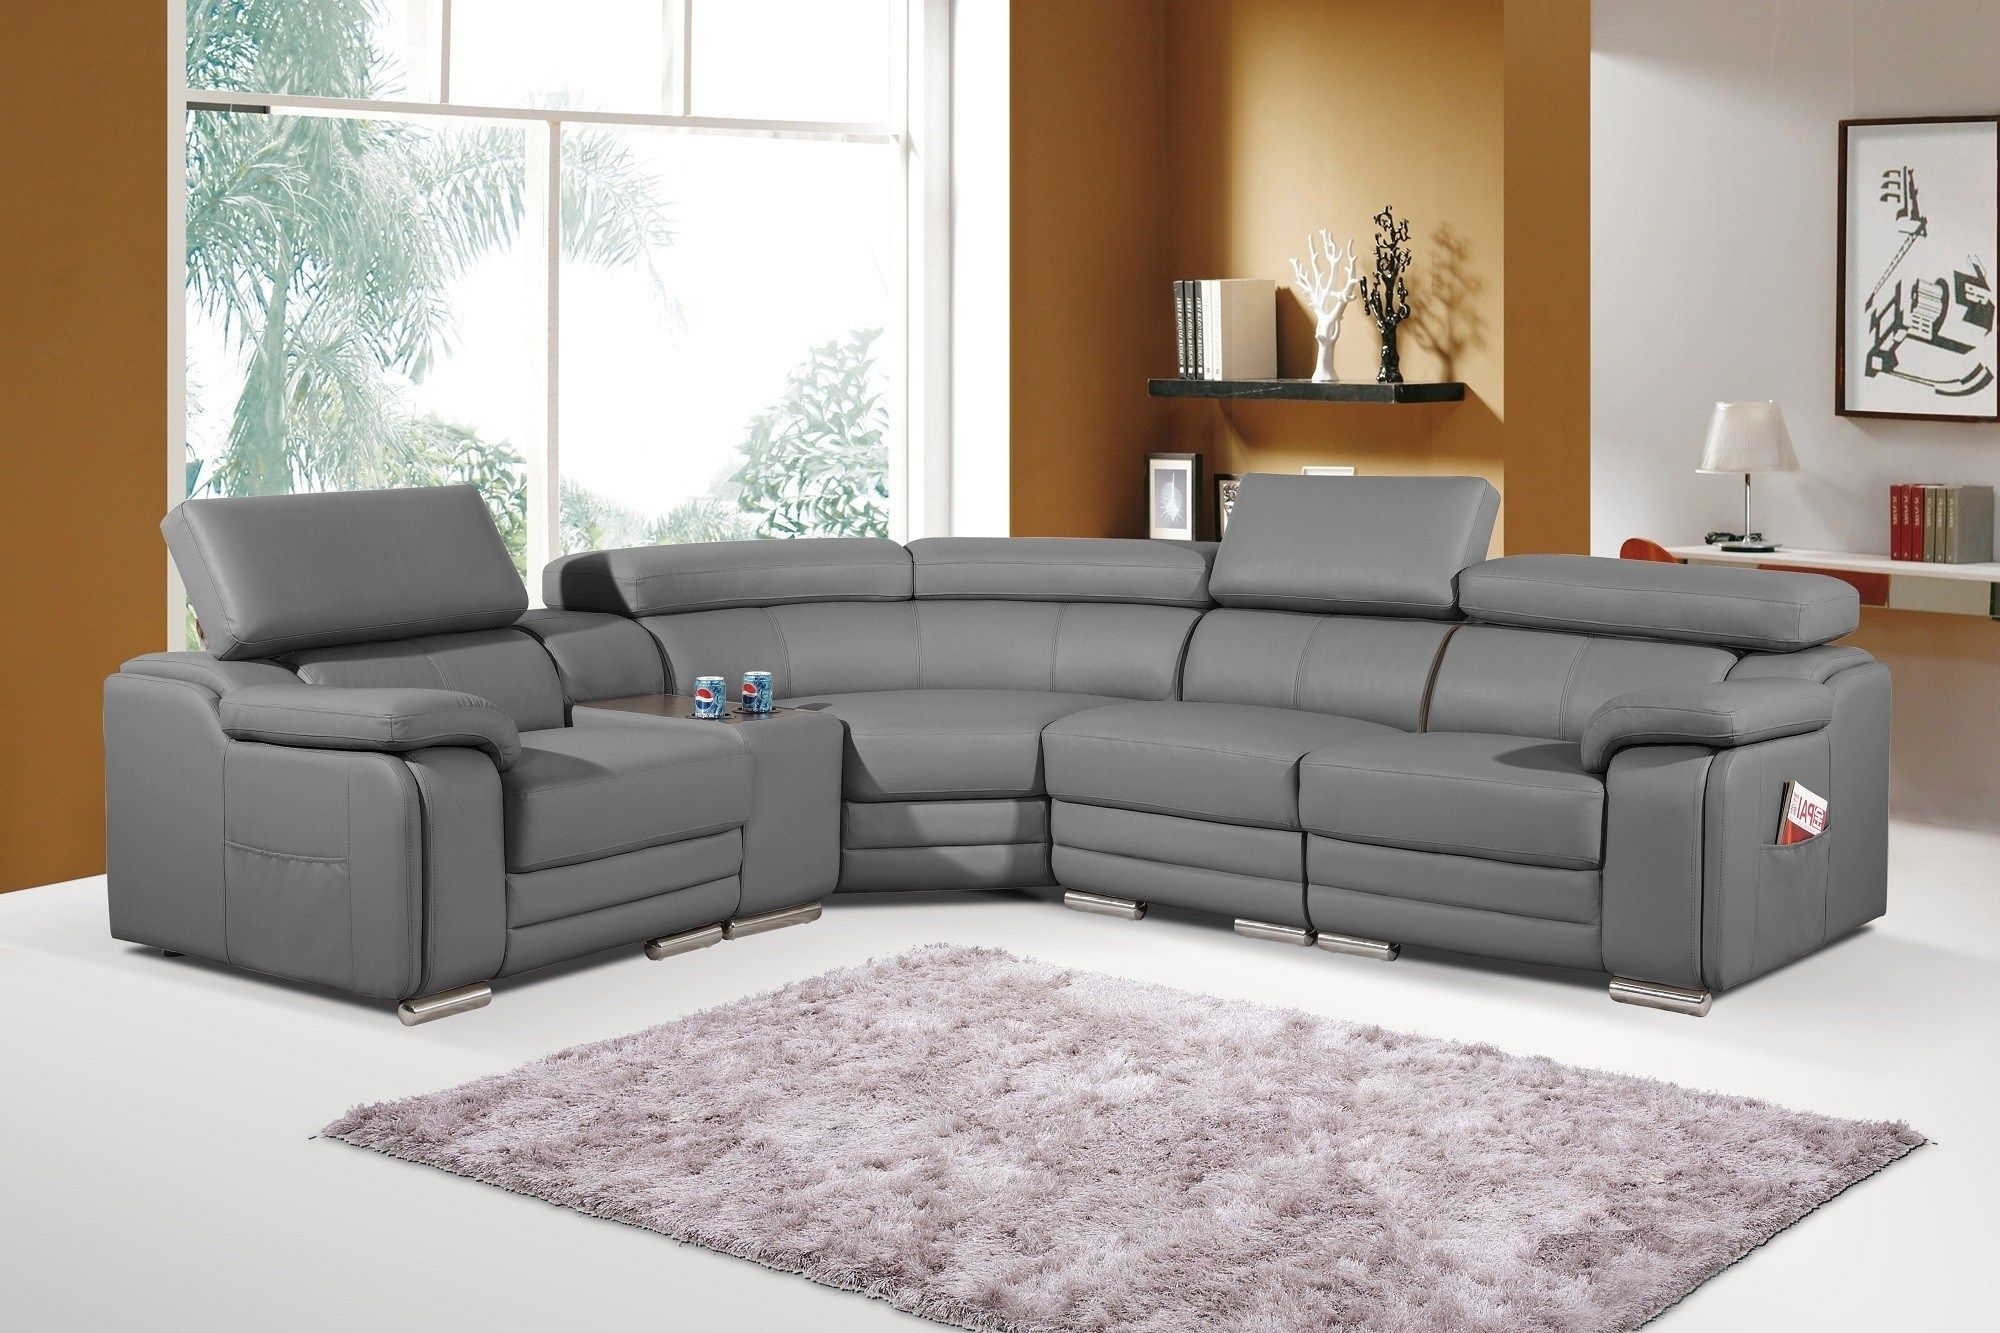 Astounding Target Sectional Sofa 74 In Sectional Sofas At Costco Pertaining To Target Sectional Sofas (View 4 of 10)